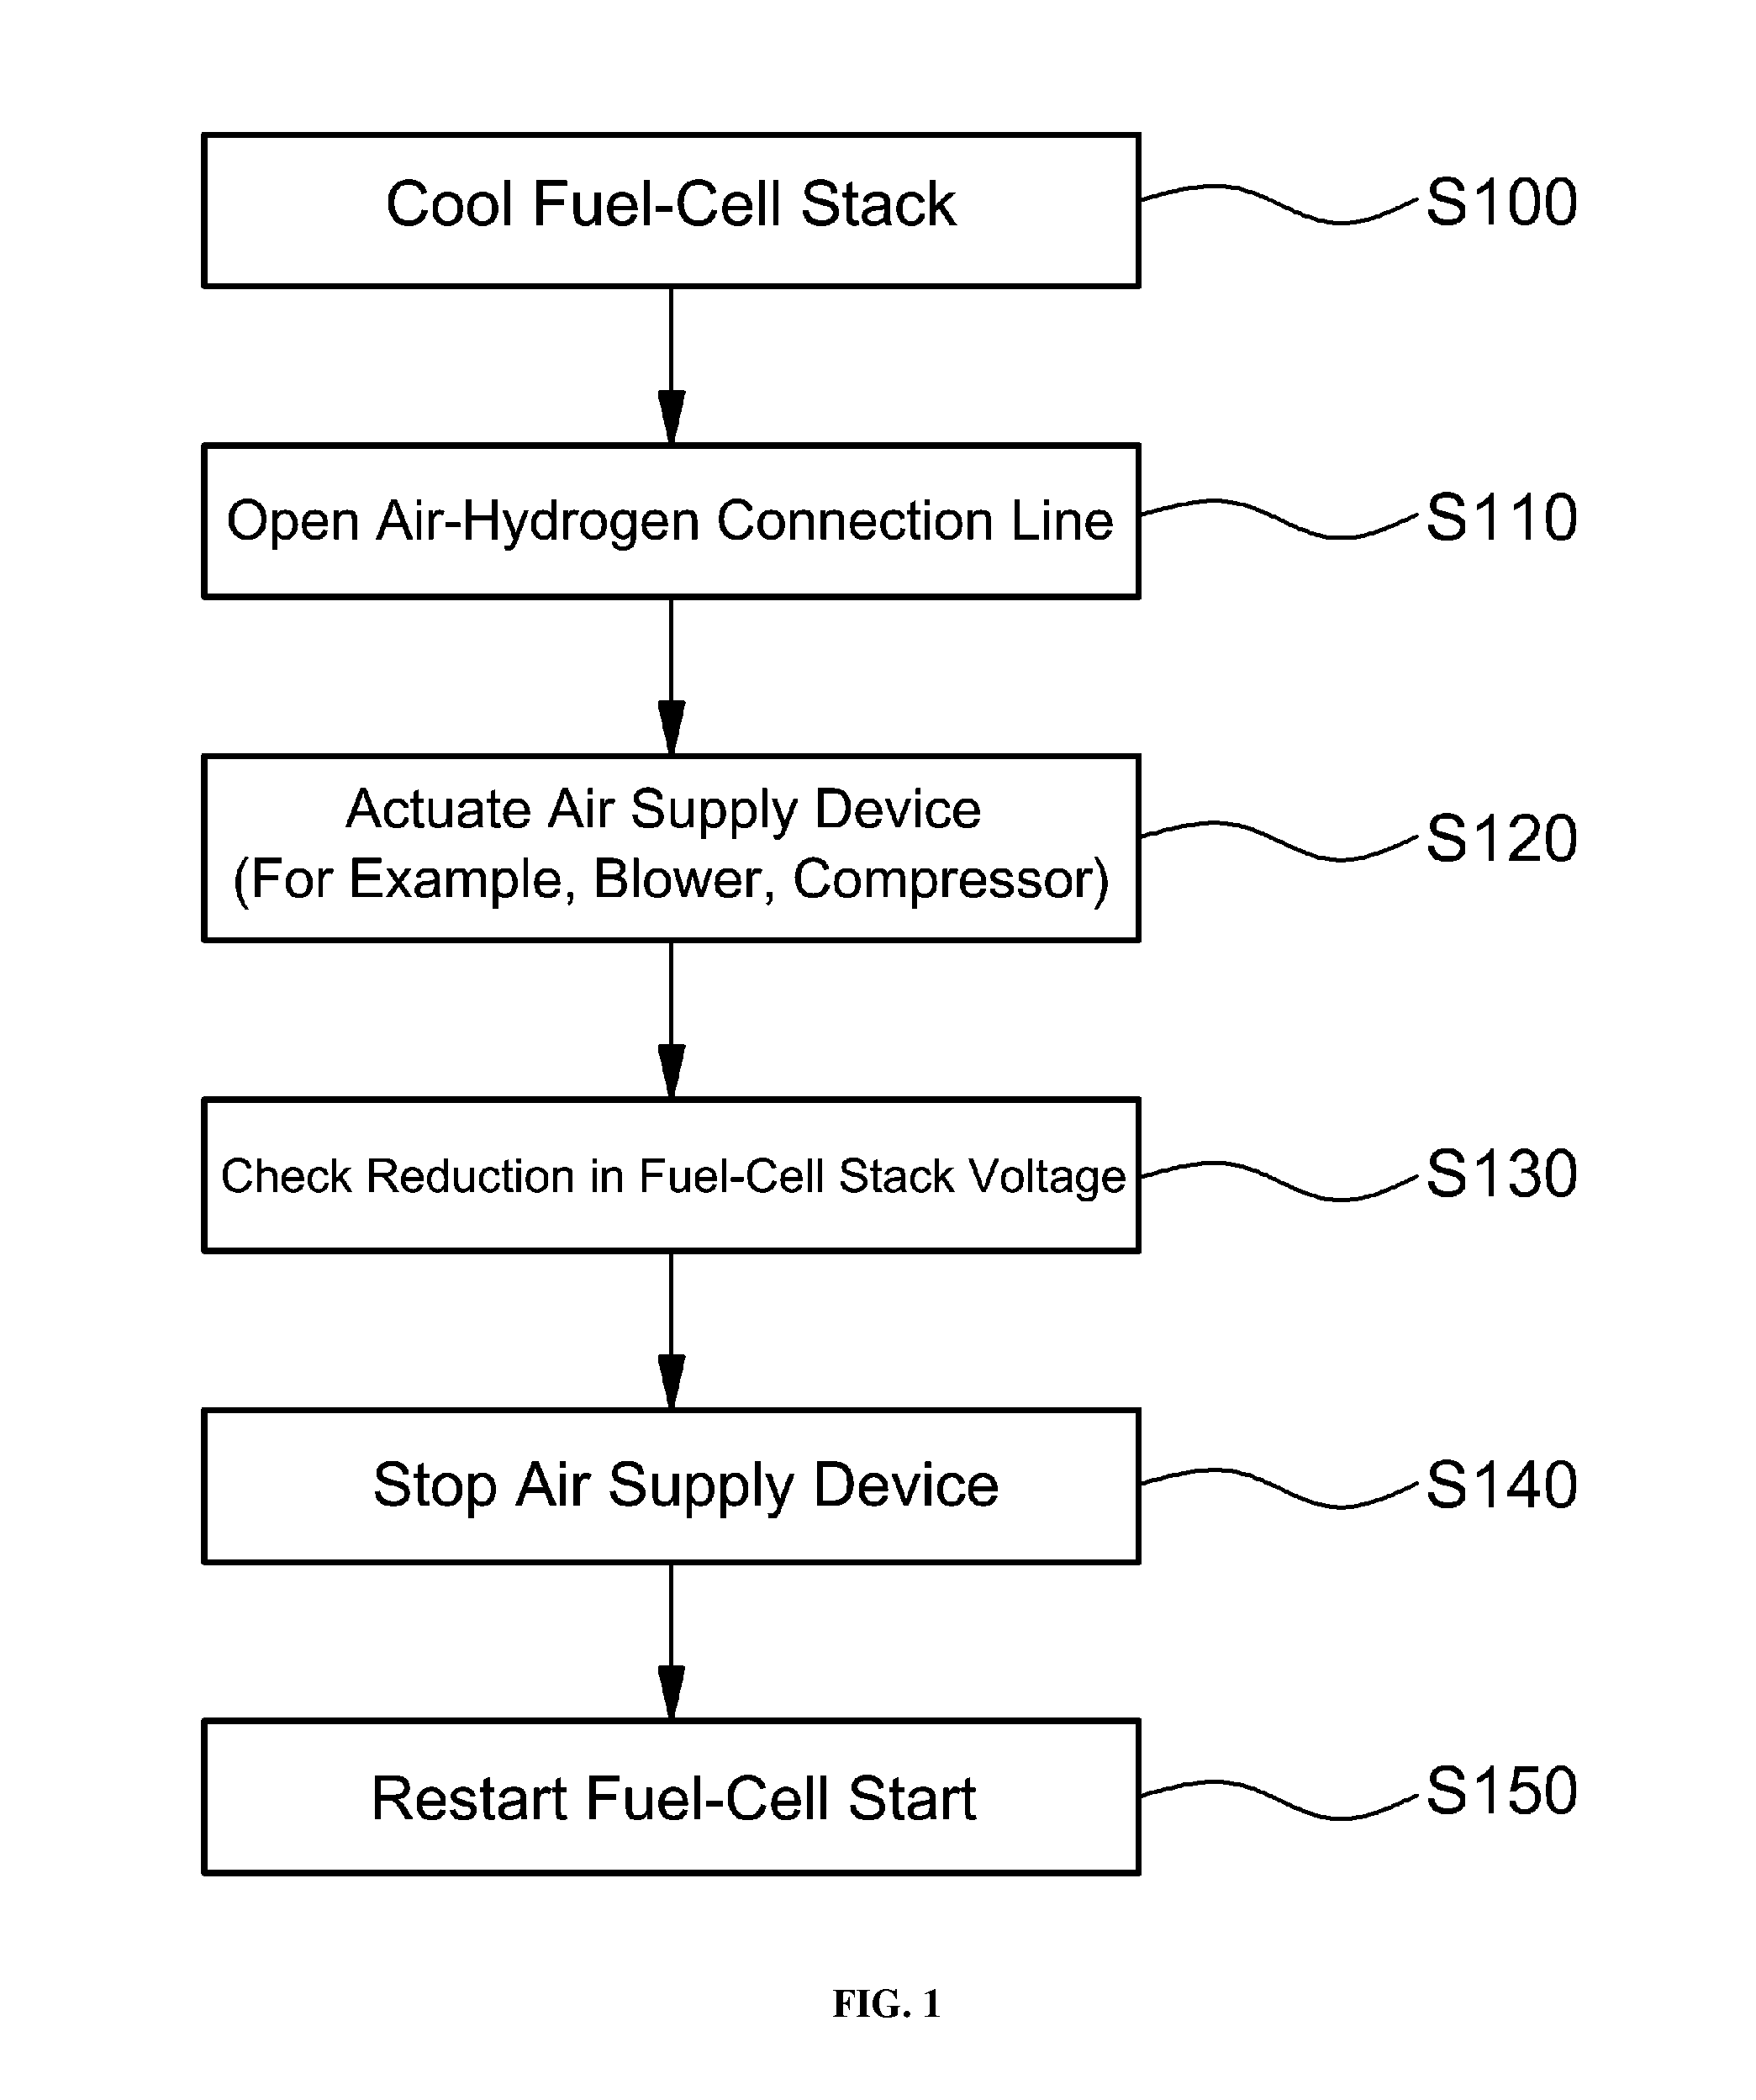 Method for recovering performance of fuel-cell stack